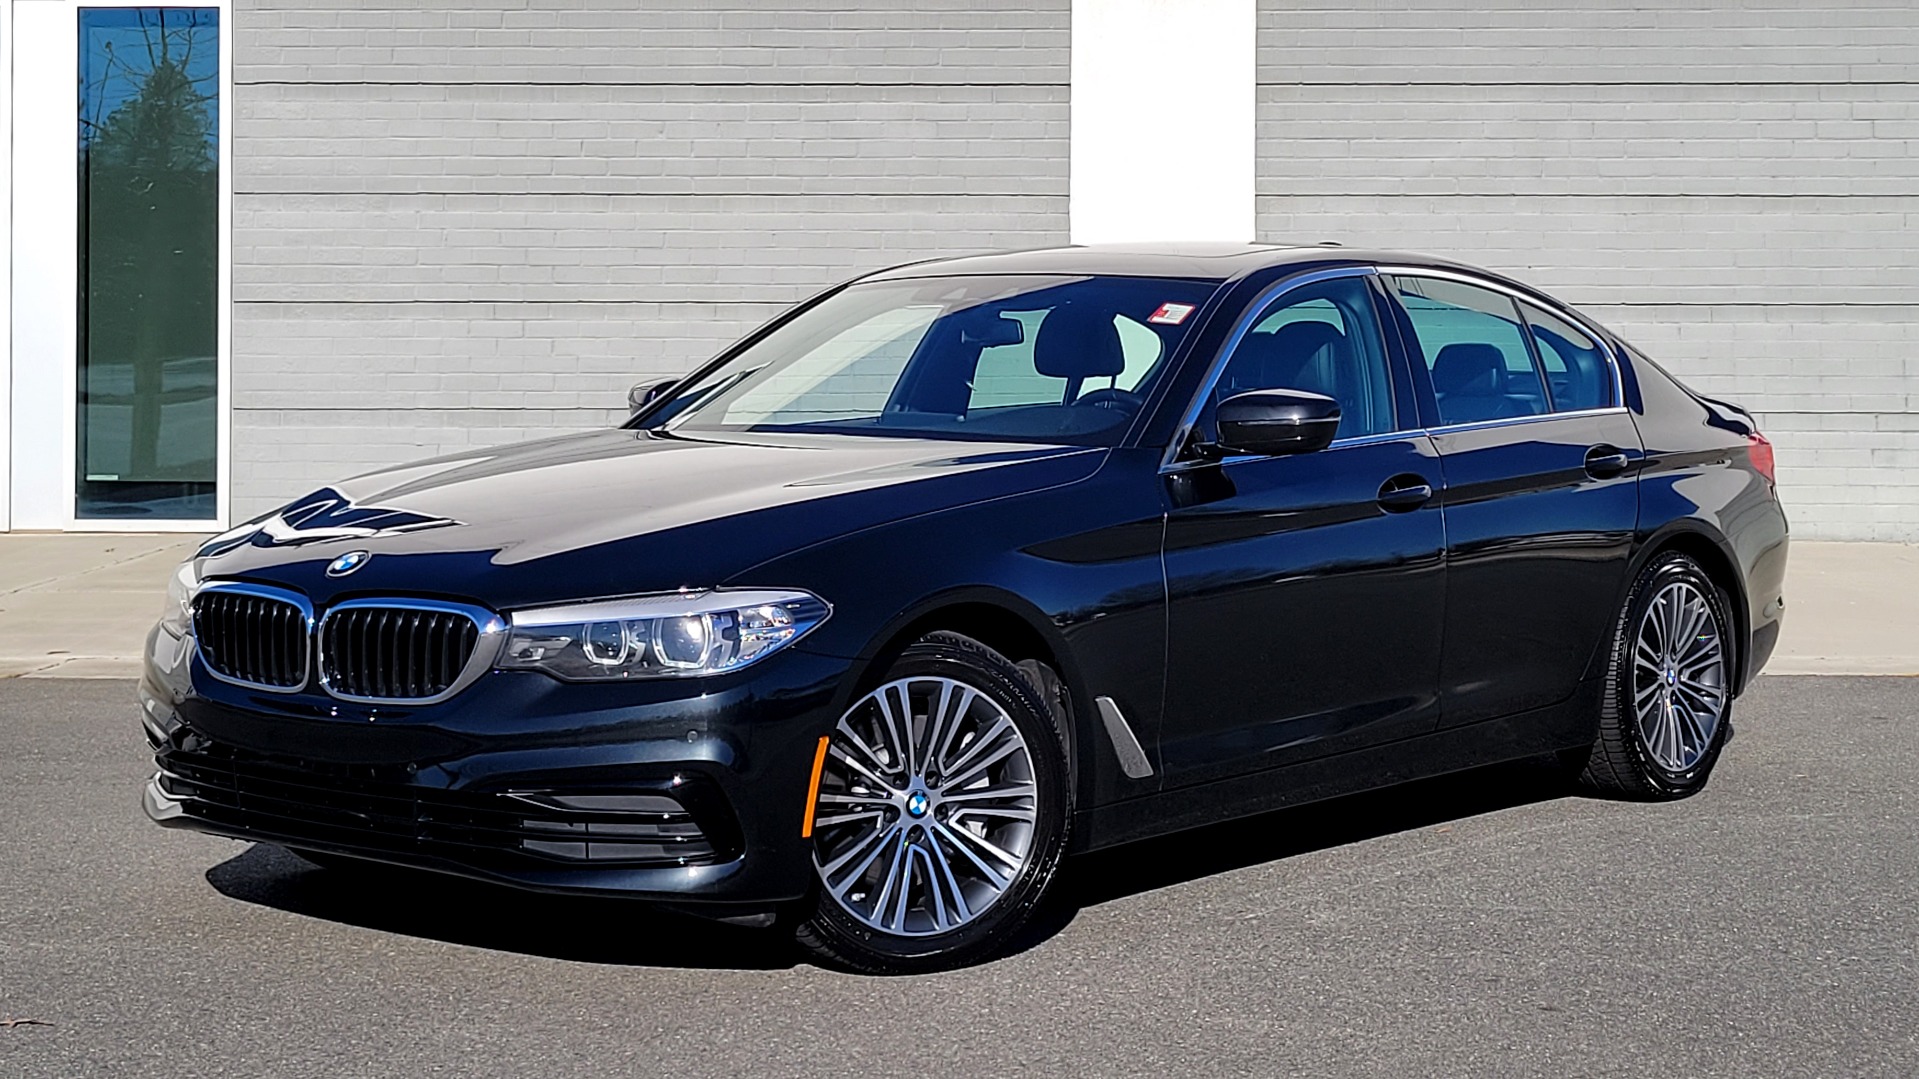 Used 2019 BMW 5 SERIES 530I XDRIVE CONVENIENCE PKG / NAV / SUNROOF / REARVIEW for sale $41,595 at Formula Imports in Charlotte NC 28227 1